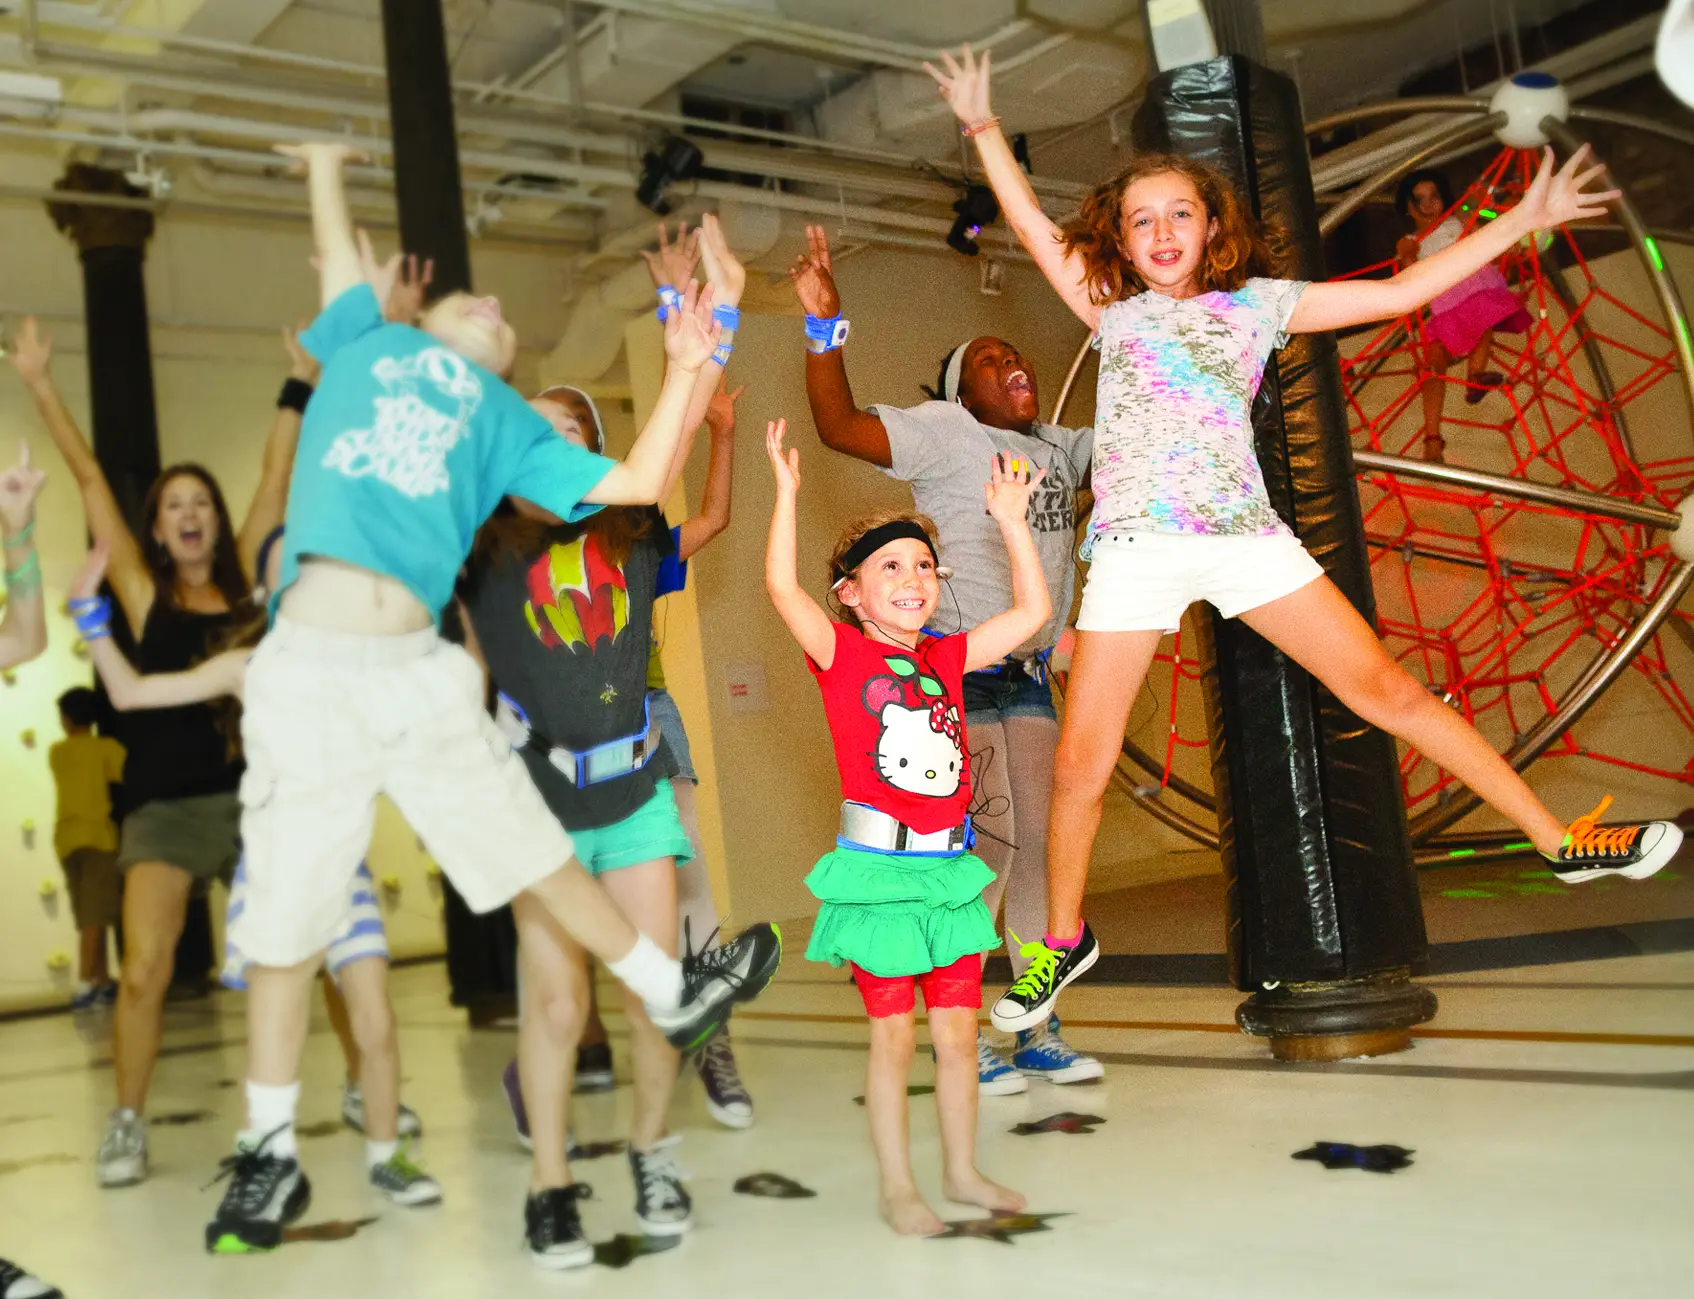 Kids use their bodies and brains to complete their fun mission at Exerblast.